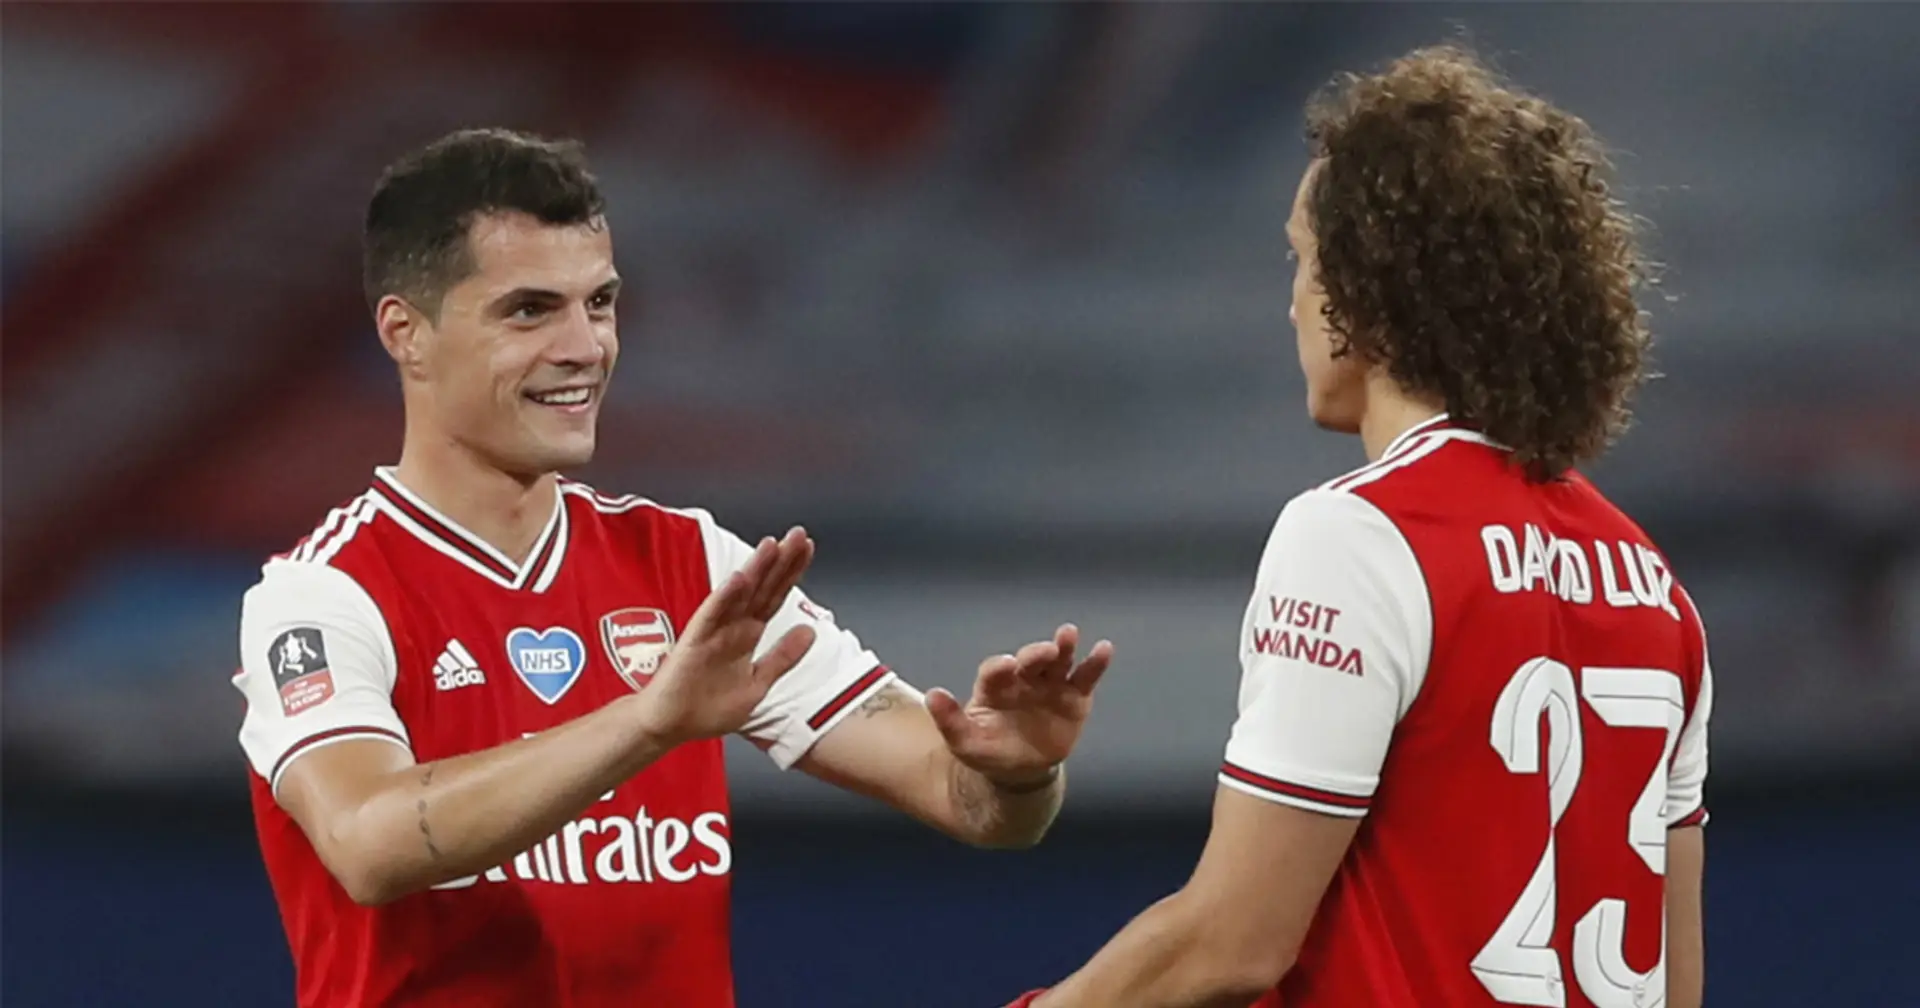 David Luiz completes redemption arc, Granit Xhaka gets 10 out of 10: rating Gunners vs City